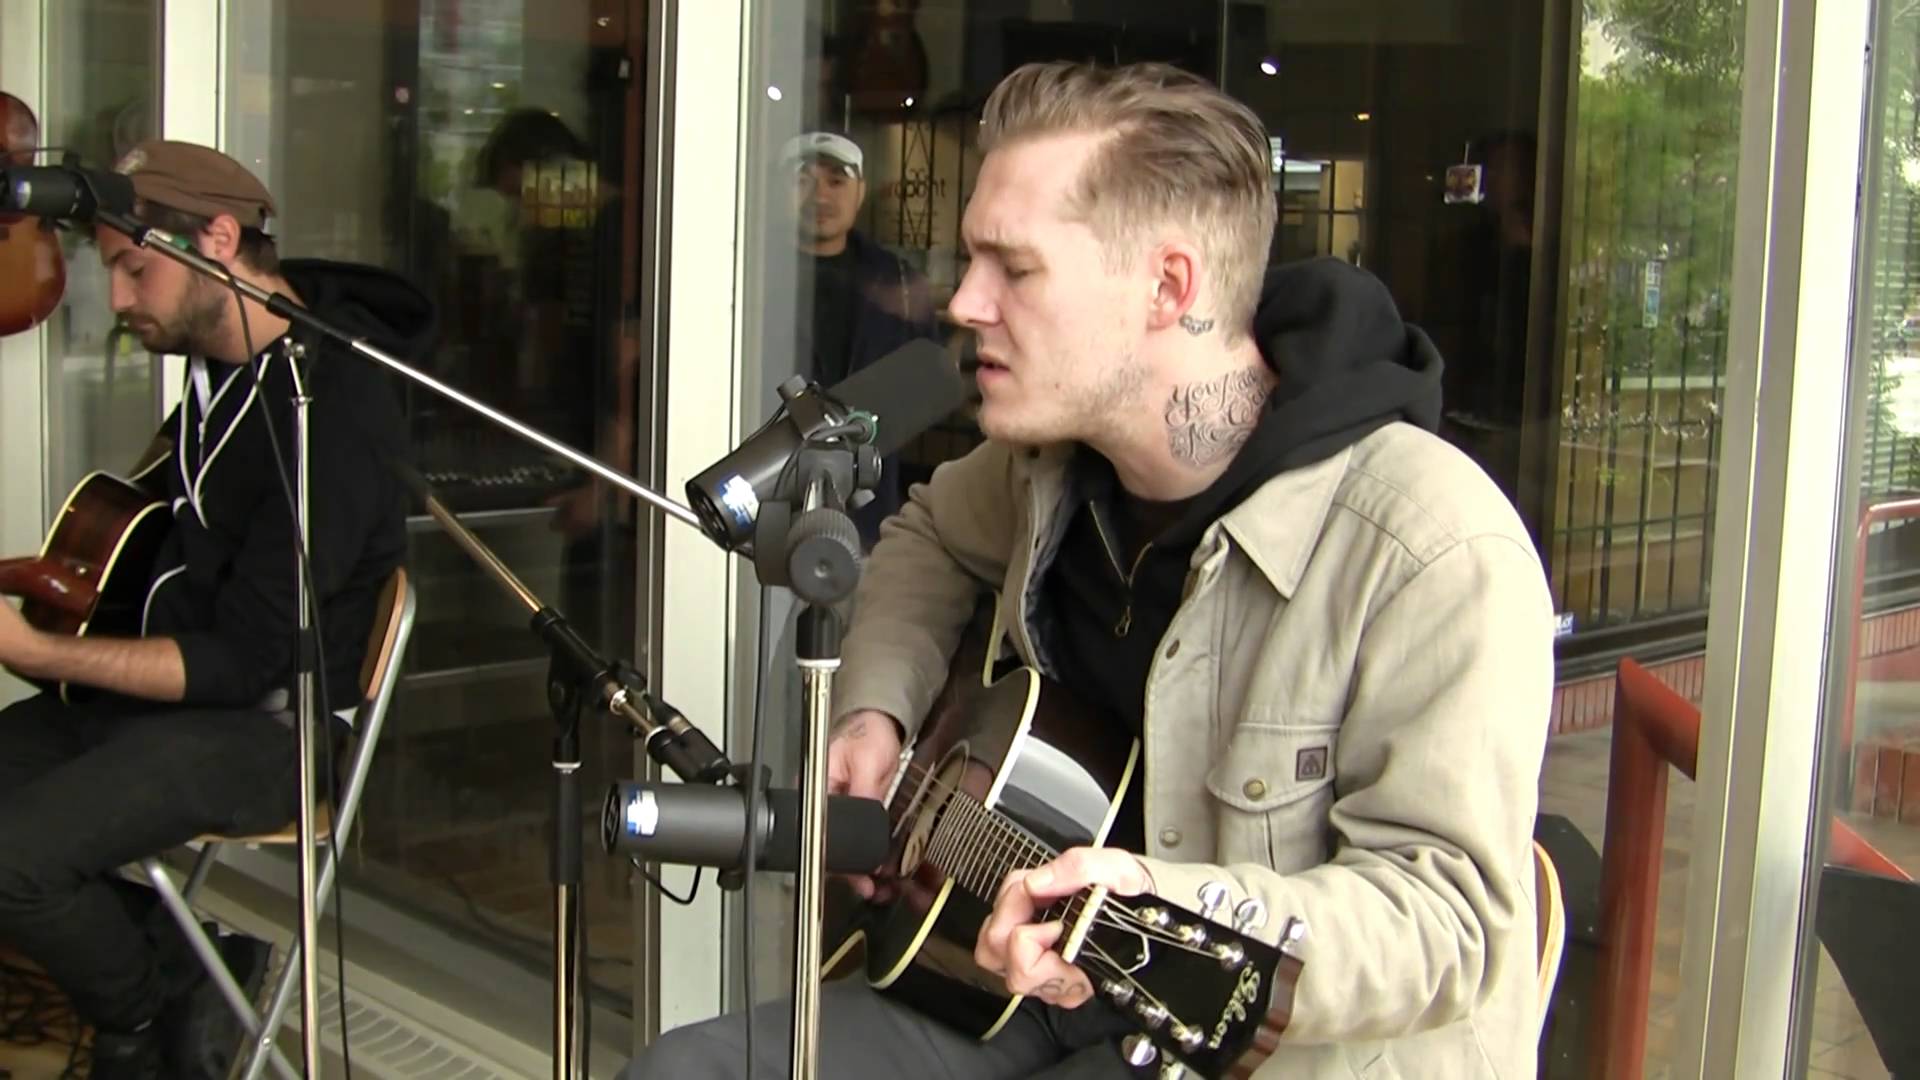 X929 Takeover The Gaslight Anthem - Boxer - YouTube